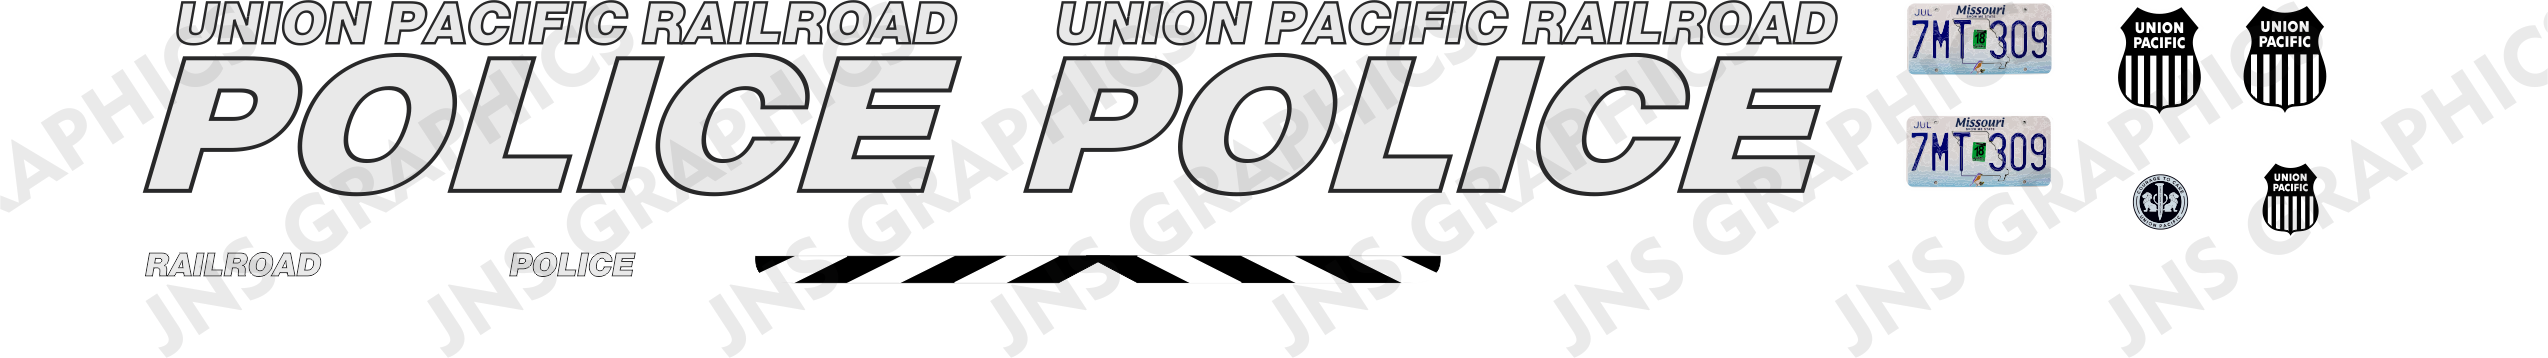 1/43 Union Pacific Police Department waterslide decals